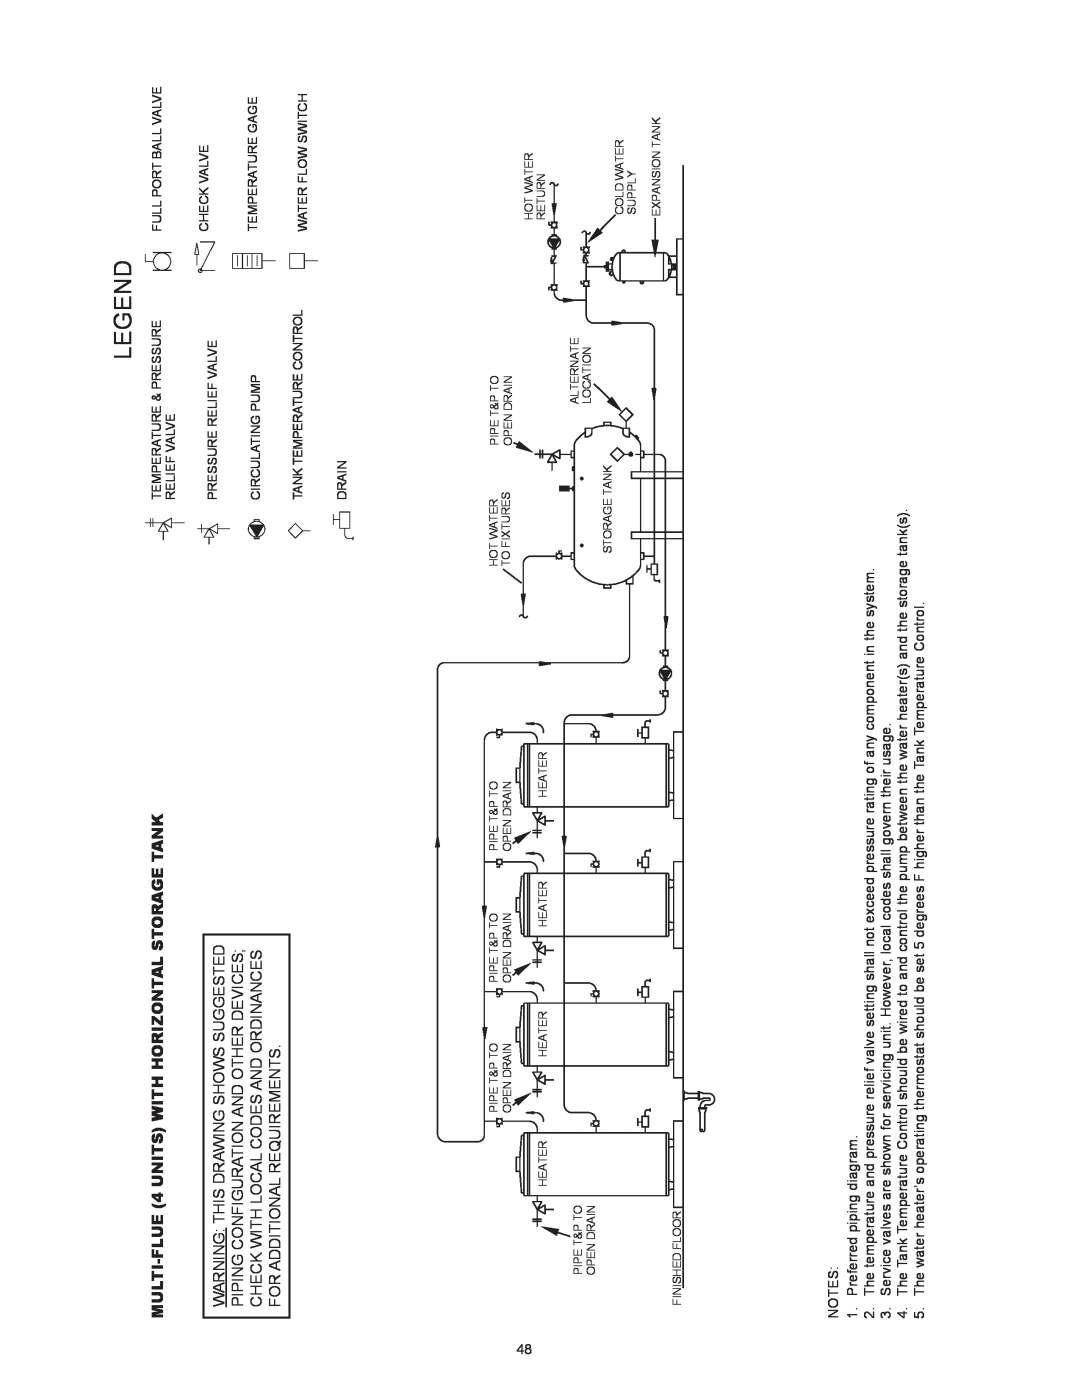 State Industries SBD85500NE MULTI-FLUE 4 UNITS WITH HORIZONTAL STORAGE TANK, Warning This Drawing Shows Suggested 